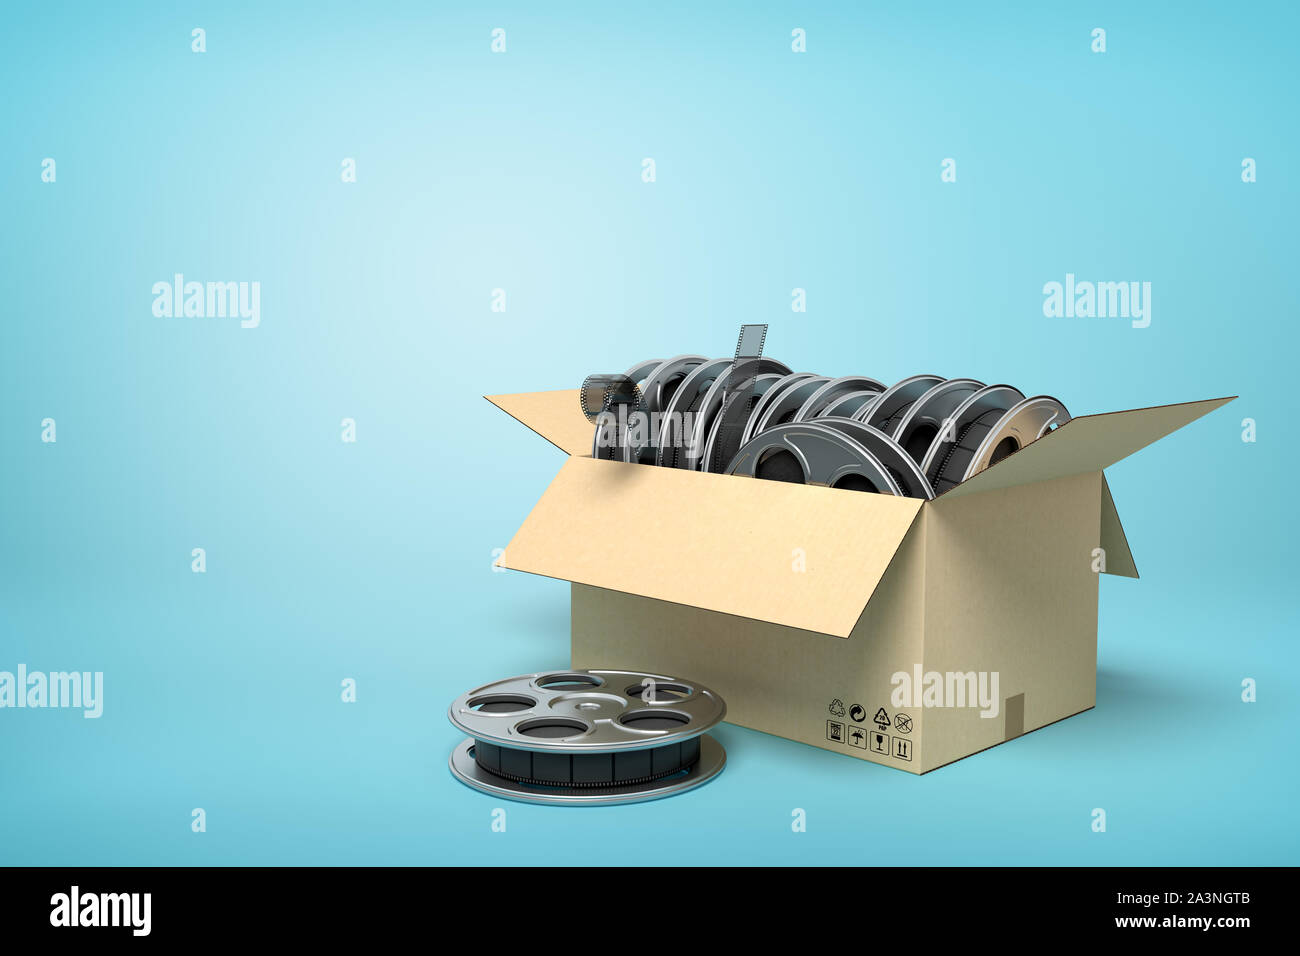 3d rendering of cardboard box full of film reels with one reel beside box on light-blue background with copy space. Stock Photo